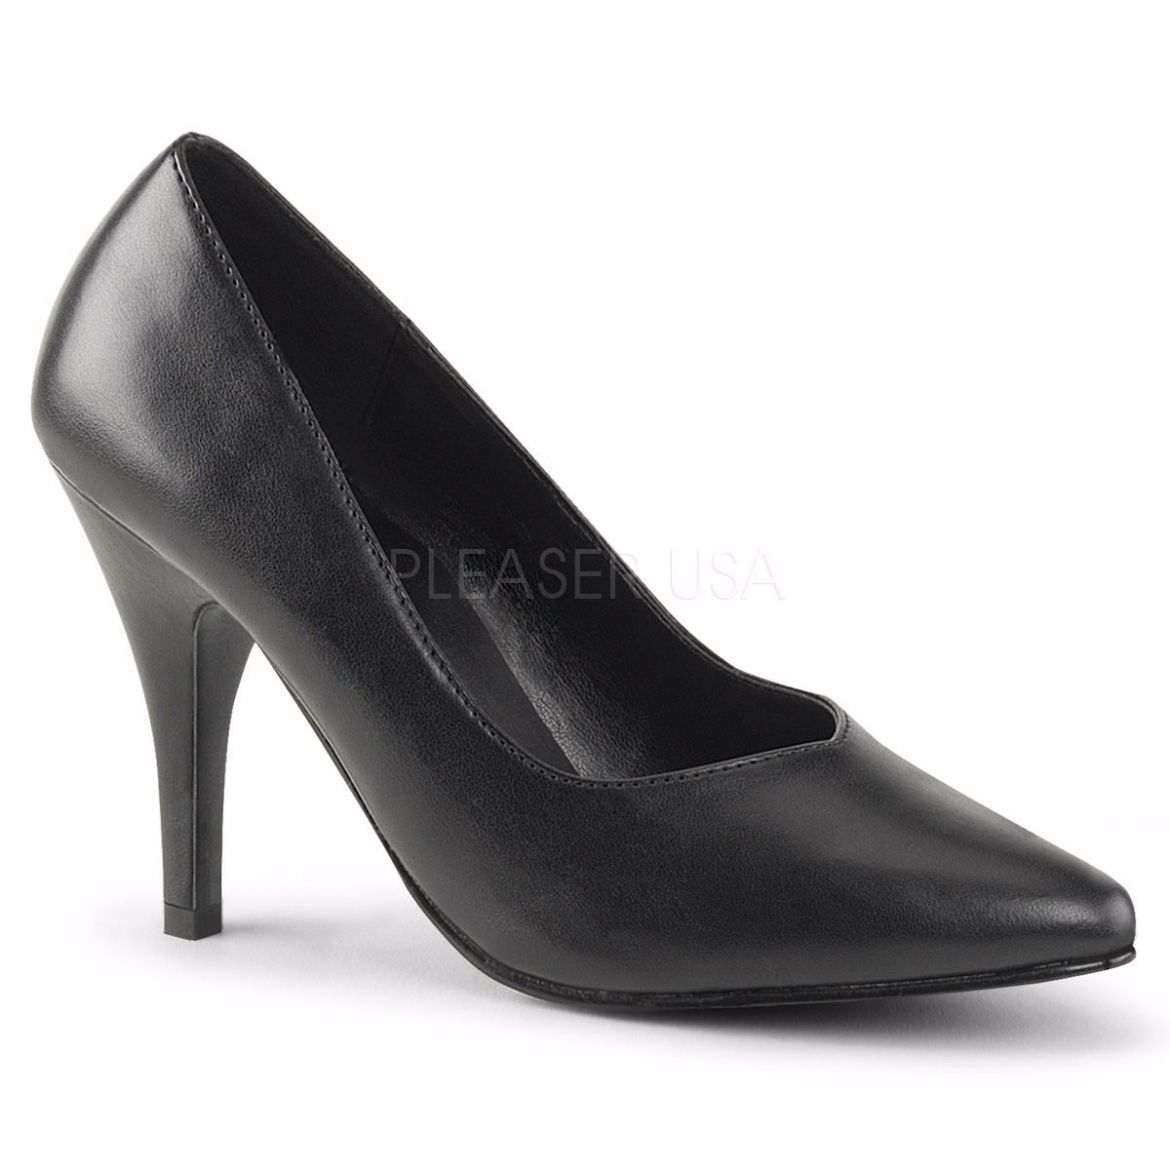 Product image of Pleaser Pink Label Dream-420 Black Faux Leather, 4 inch (10.2 cm) Heel Court Pump Shoes